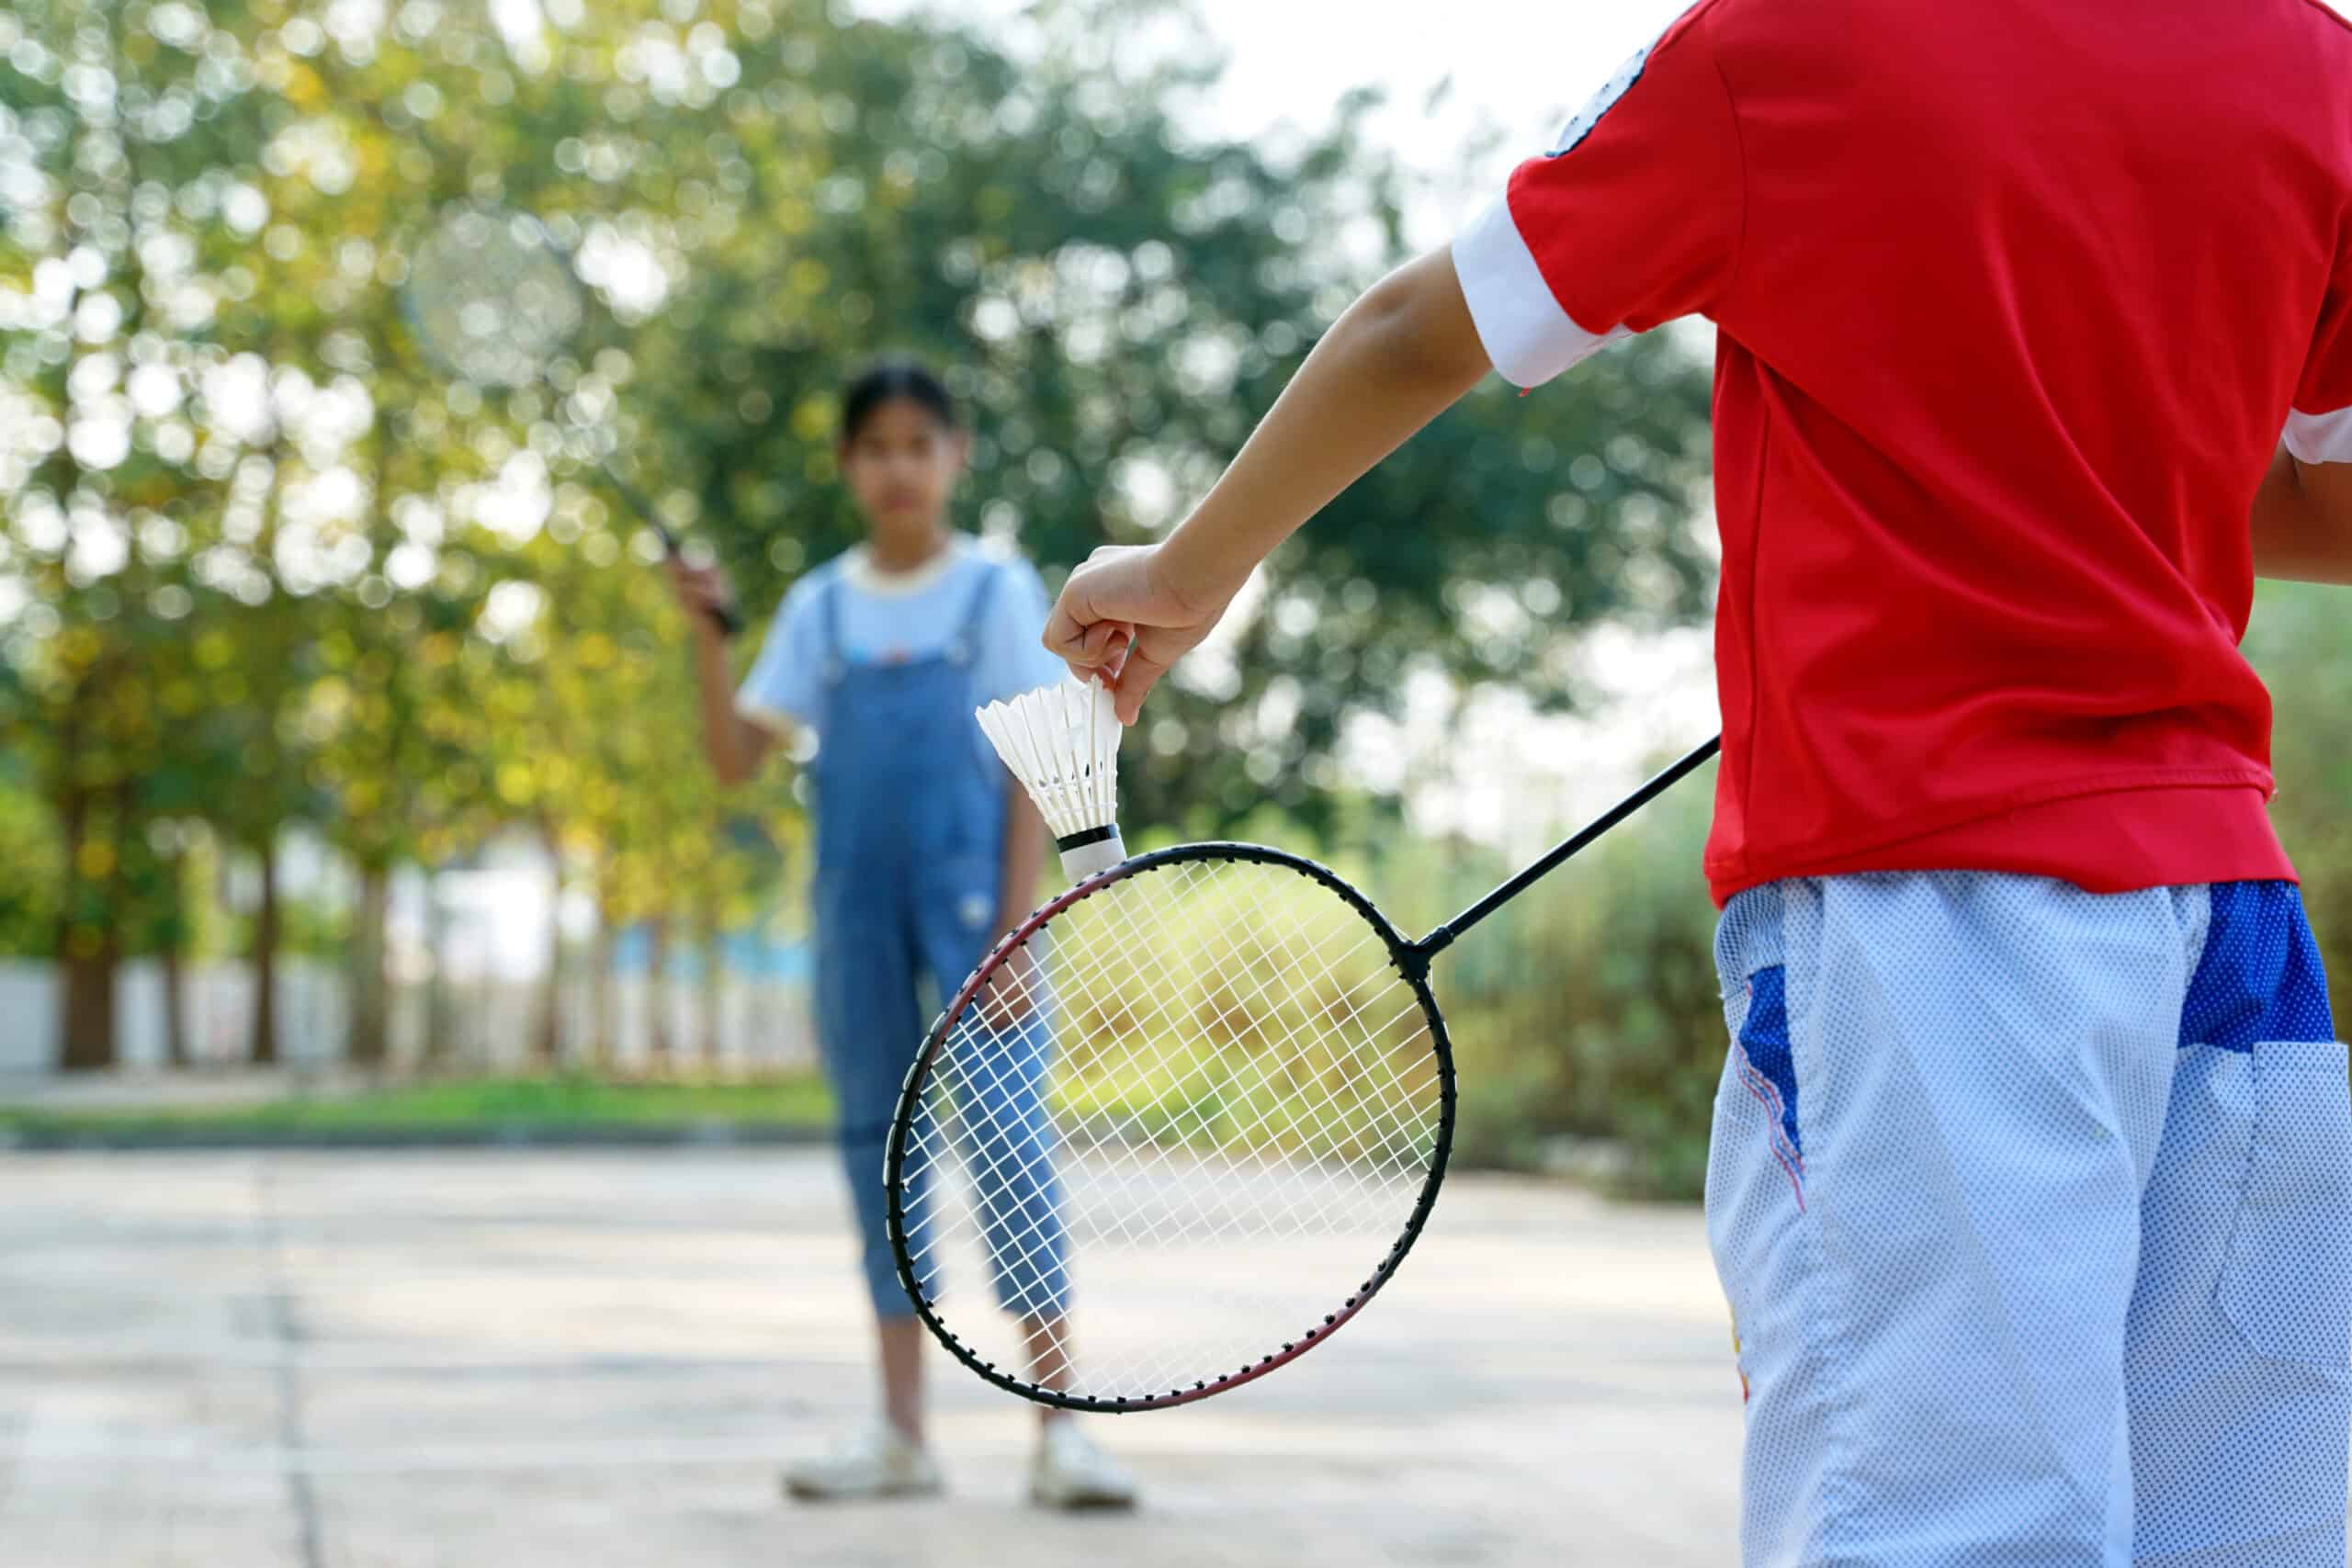 www.appr.com : What are the dimensions of a backyard badminton court?